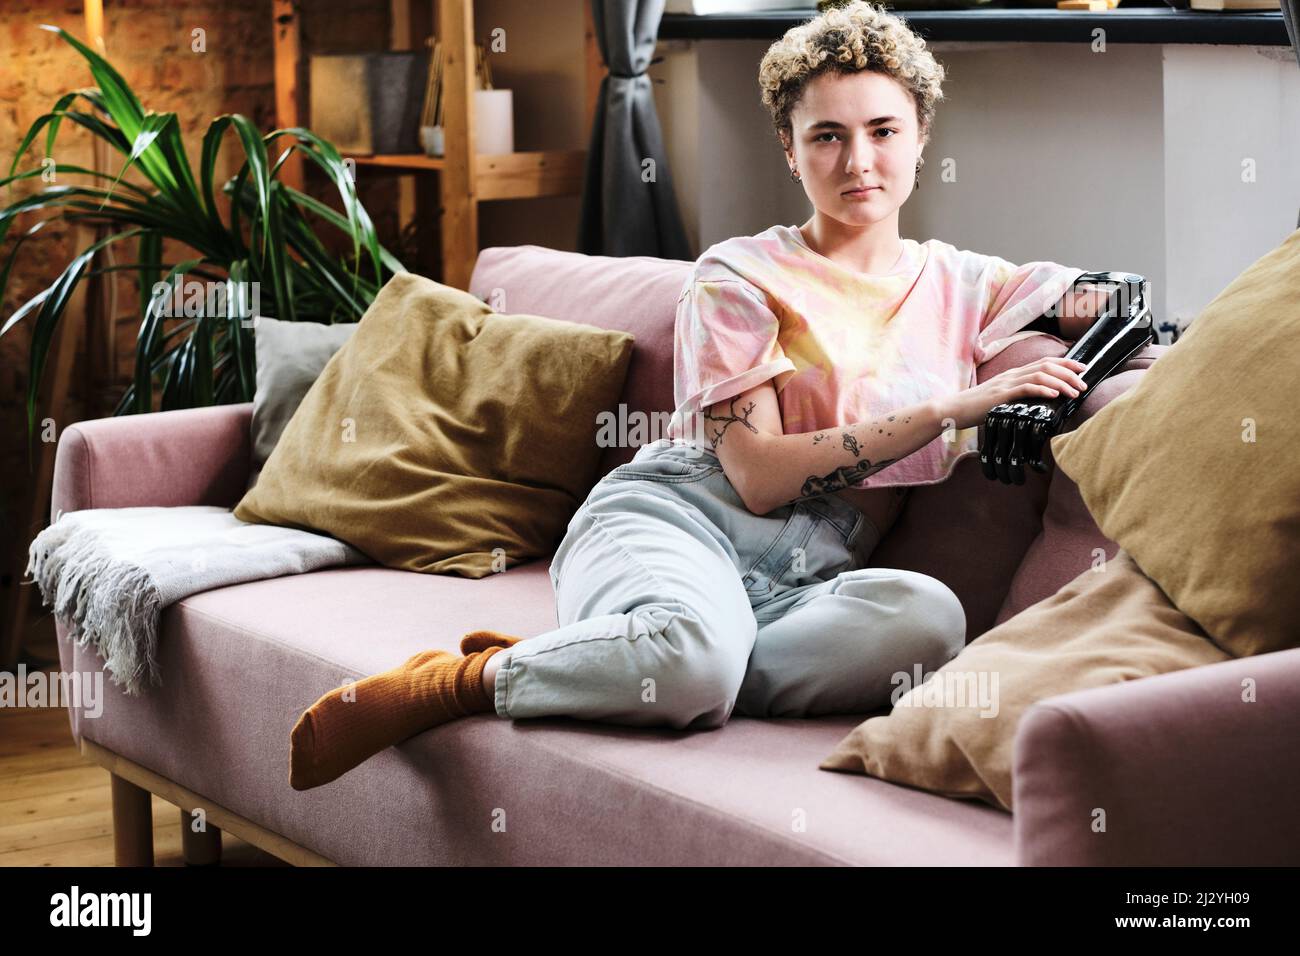 Portrait of young woman with prosthetic arm sitting on sofa in living room Stock Photo